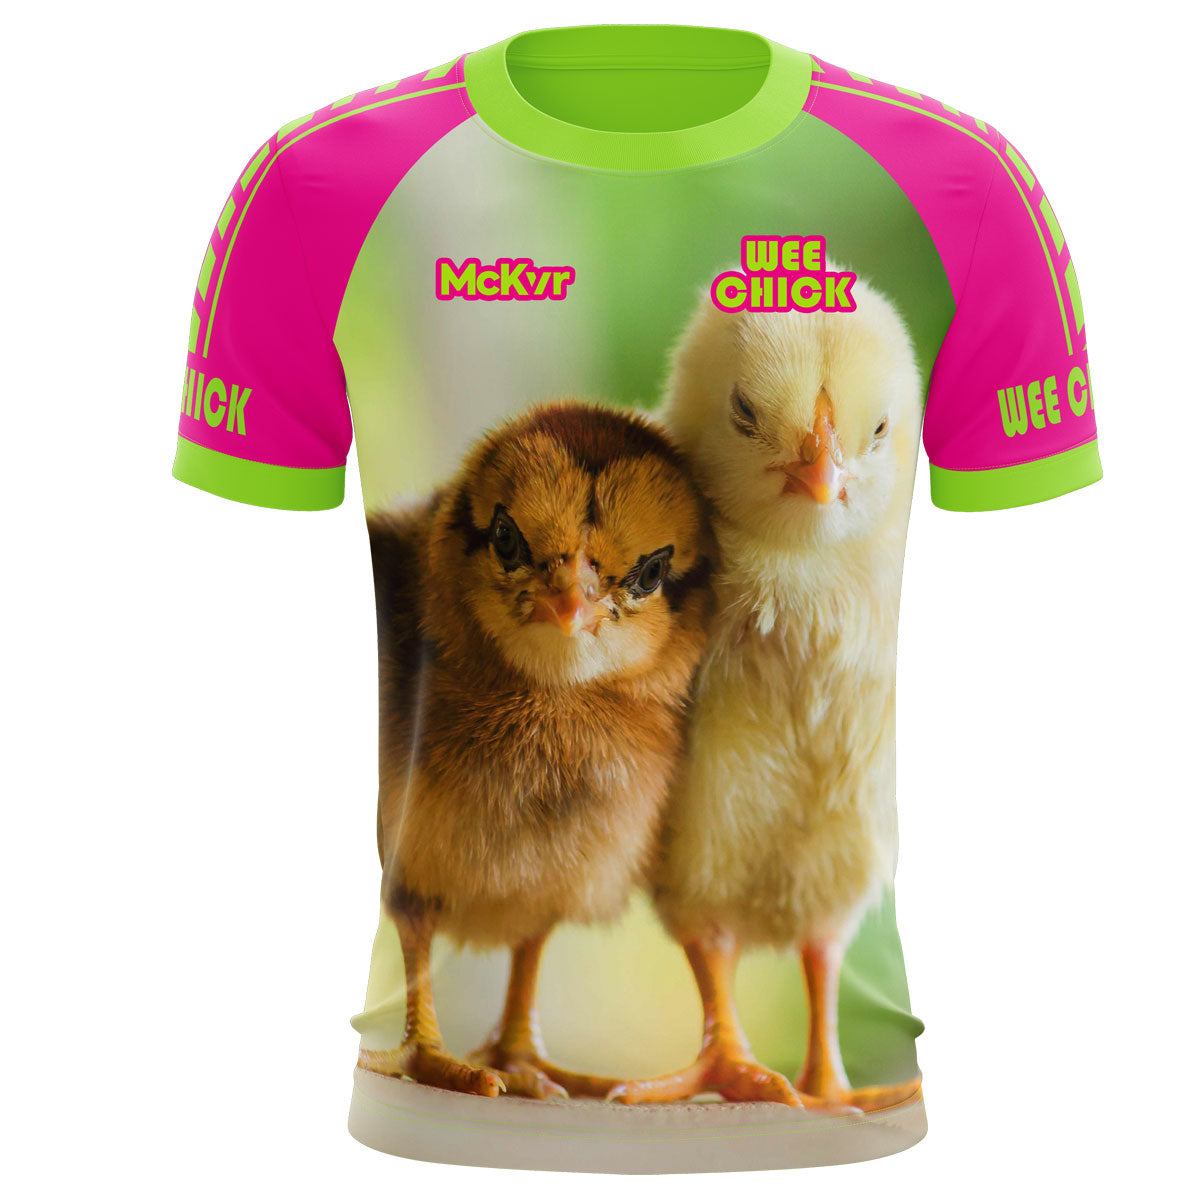 Mc Keever Wee Chick 2023 Ploughing Championships Jersey - Adult